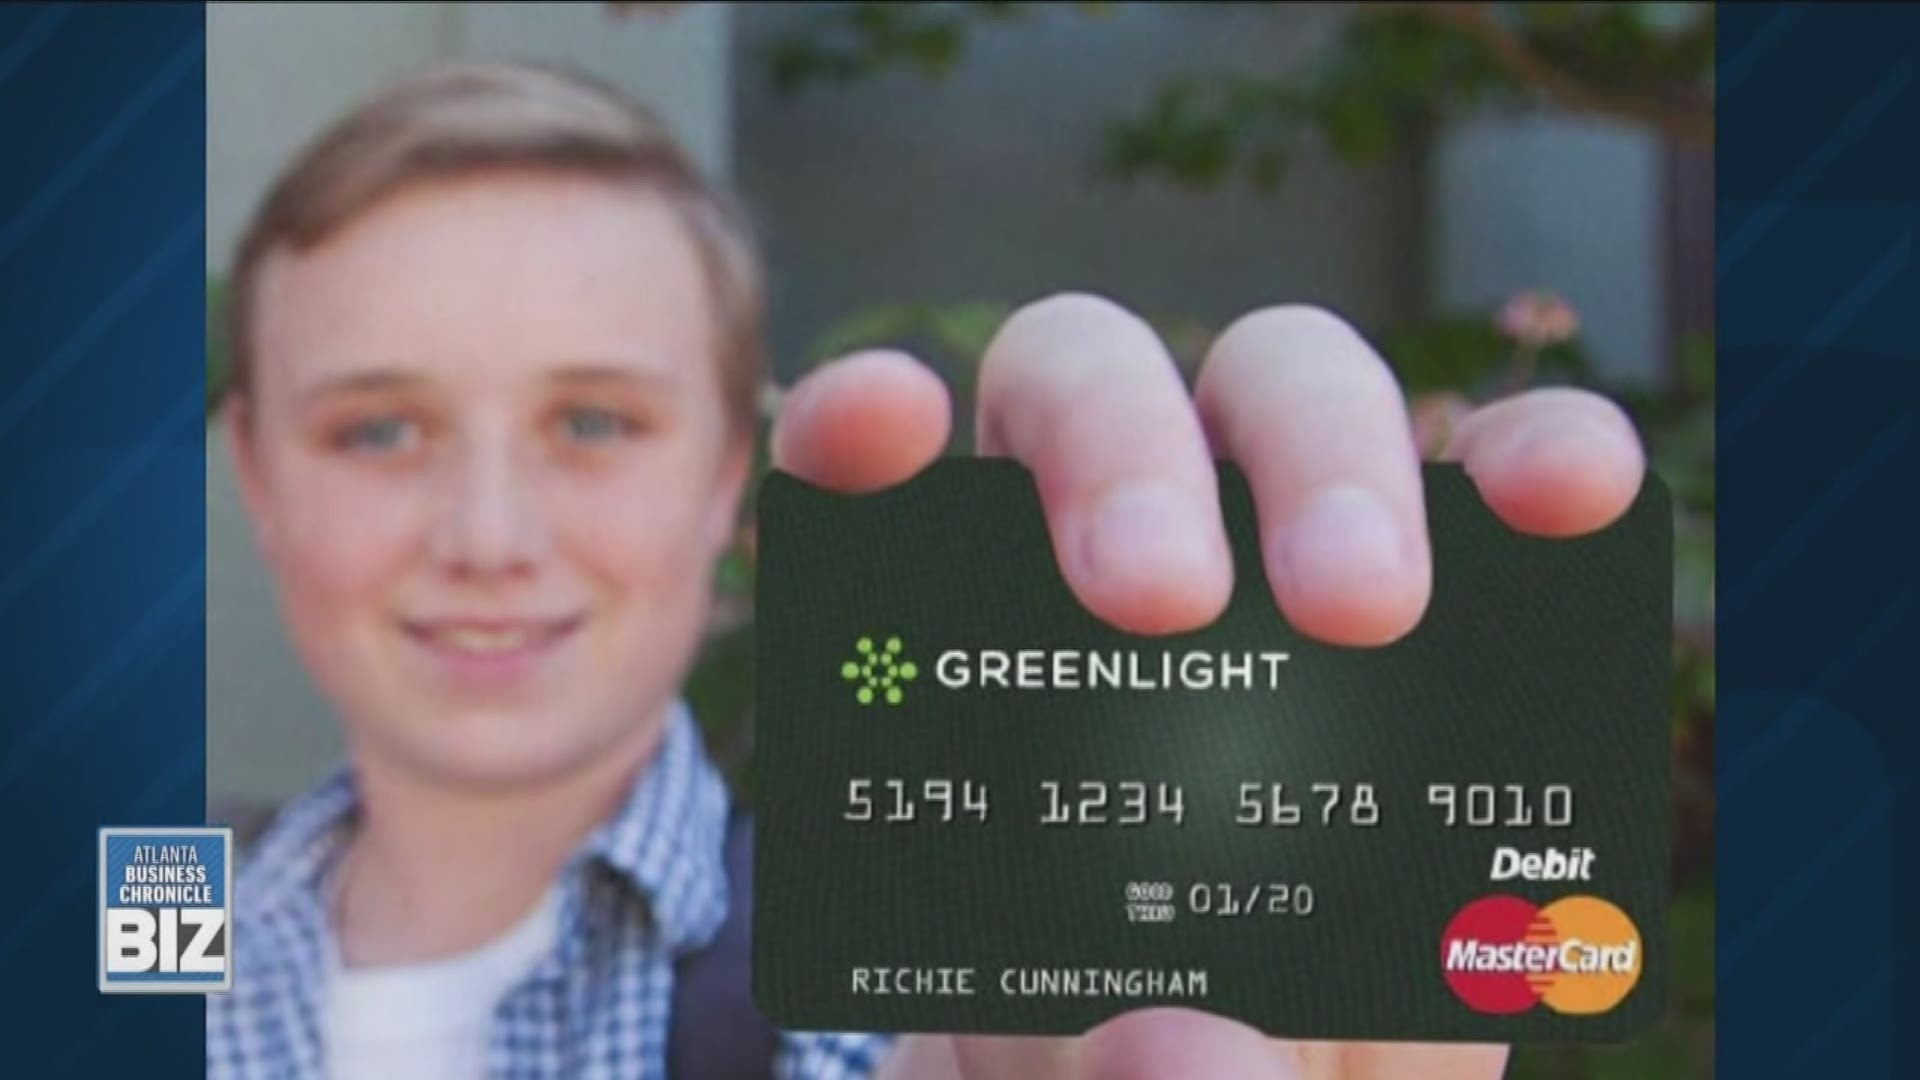 The debit card for kids! Atlanta Business Chronicle publisher David Rubinger welcomes the man behind Greenlight... Co-Founder/CEO Tim Sheehan to BIZ.